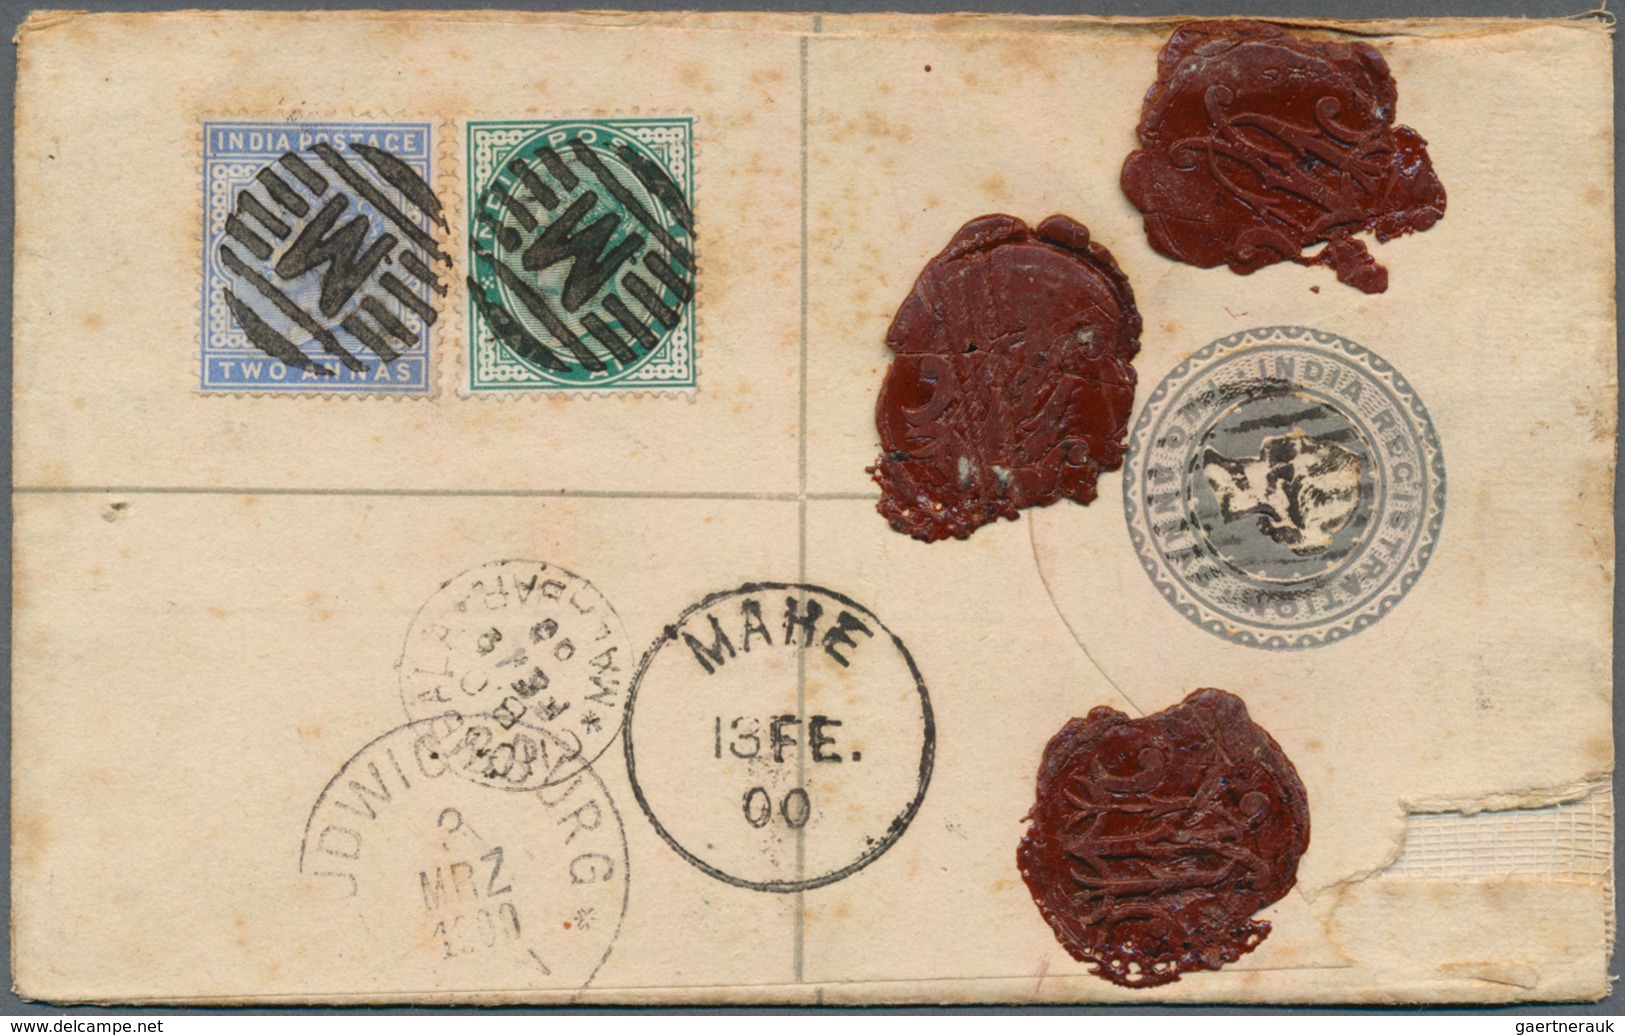 22697 Indien: 1857-1946 FRENCH INDIA: 17 covers and 9 stamps used in French India, with 5 covers used from